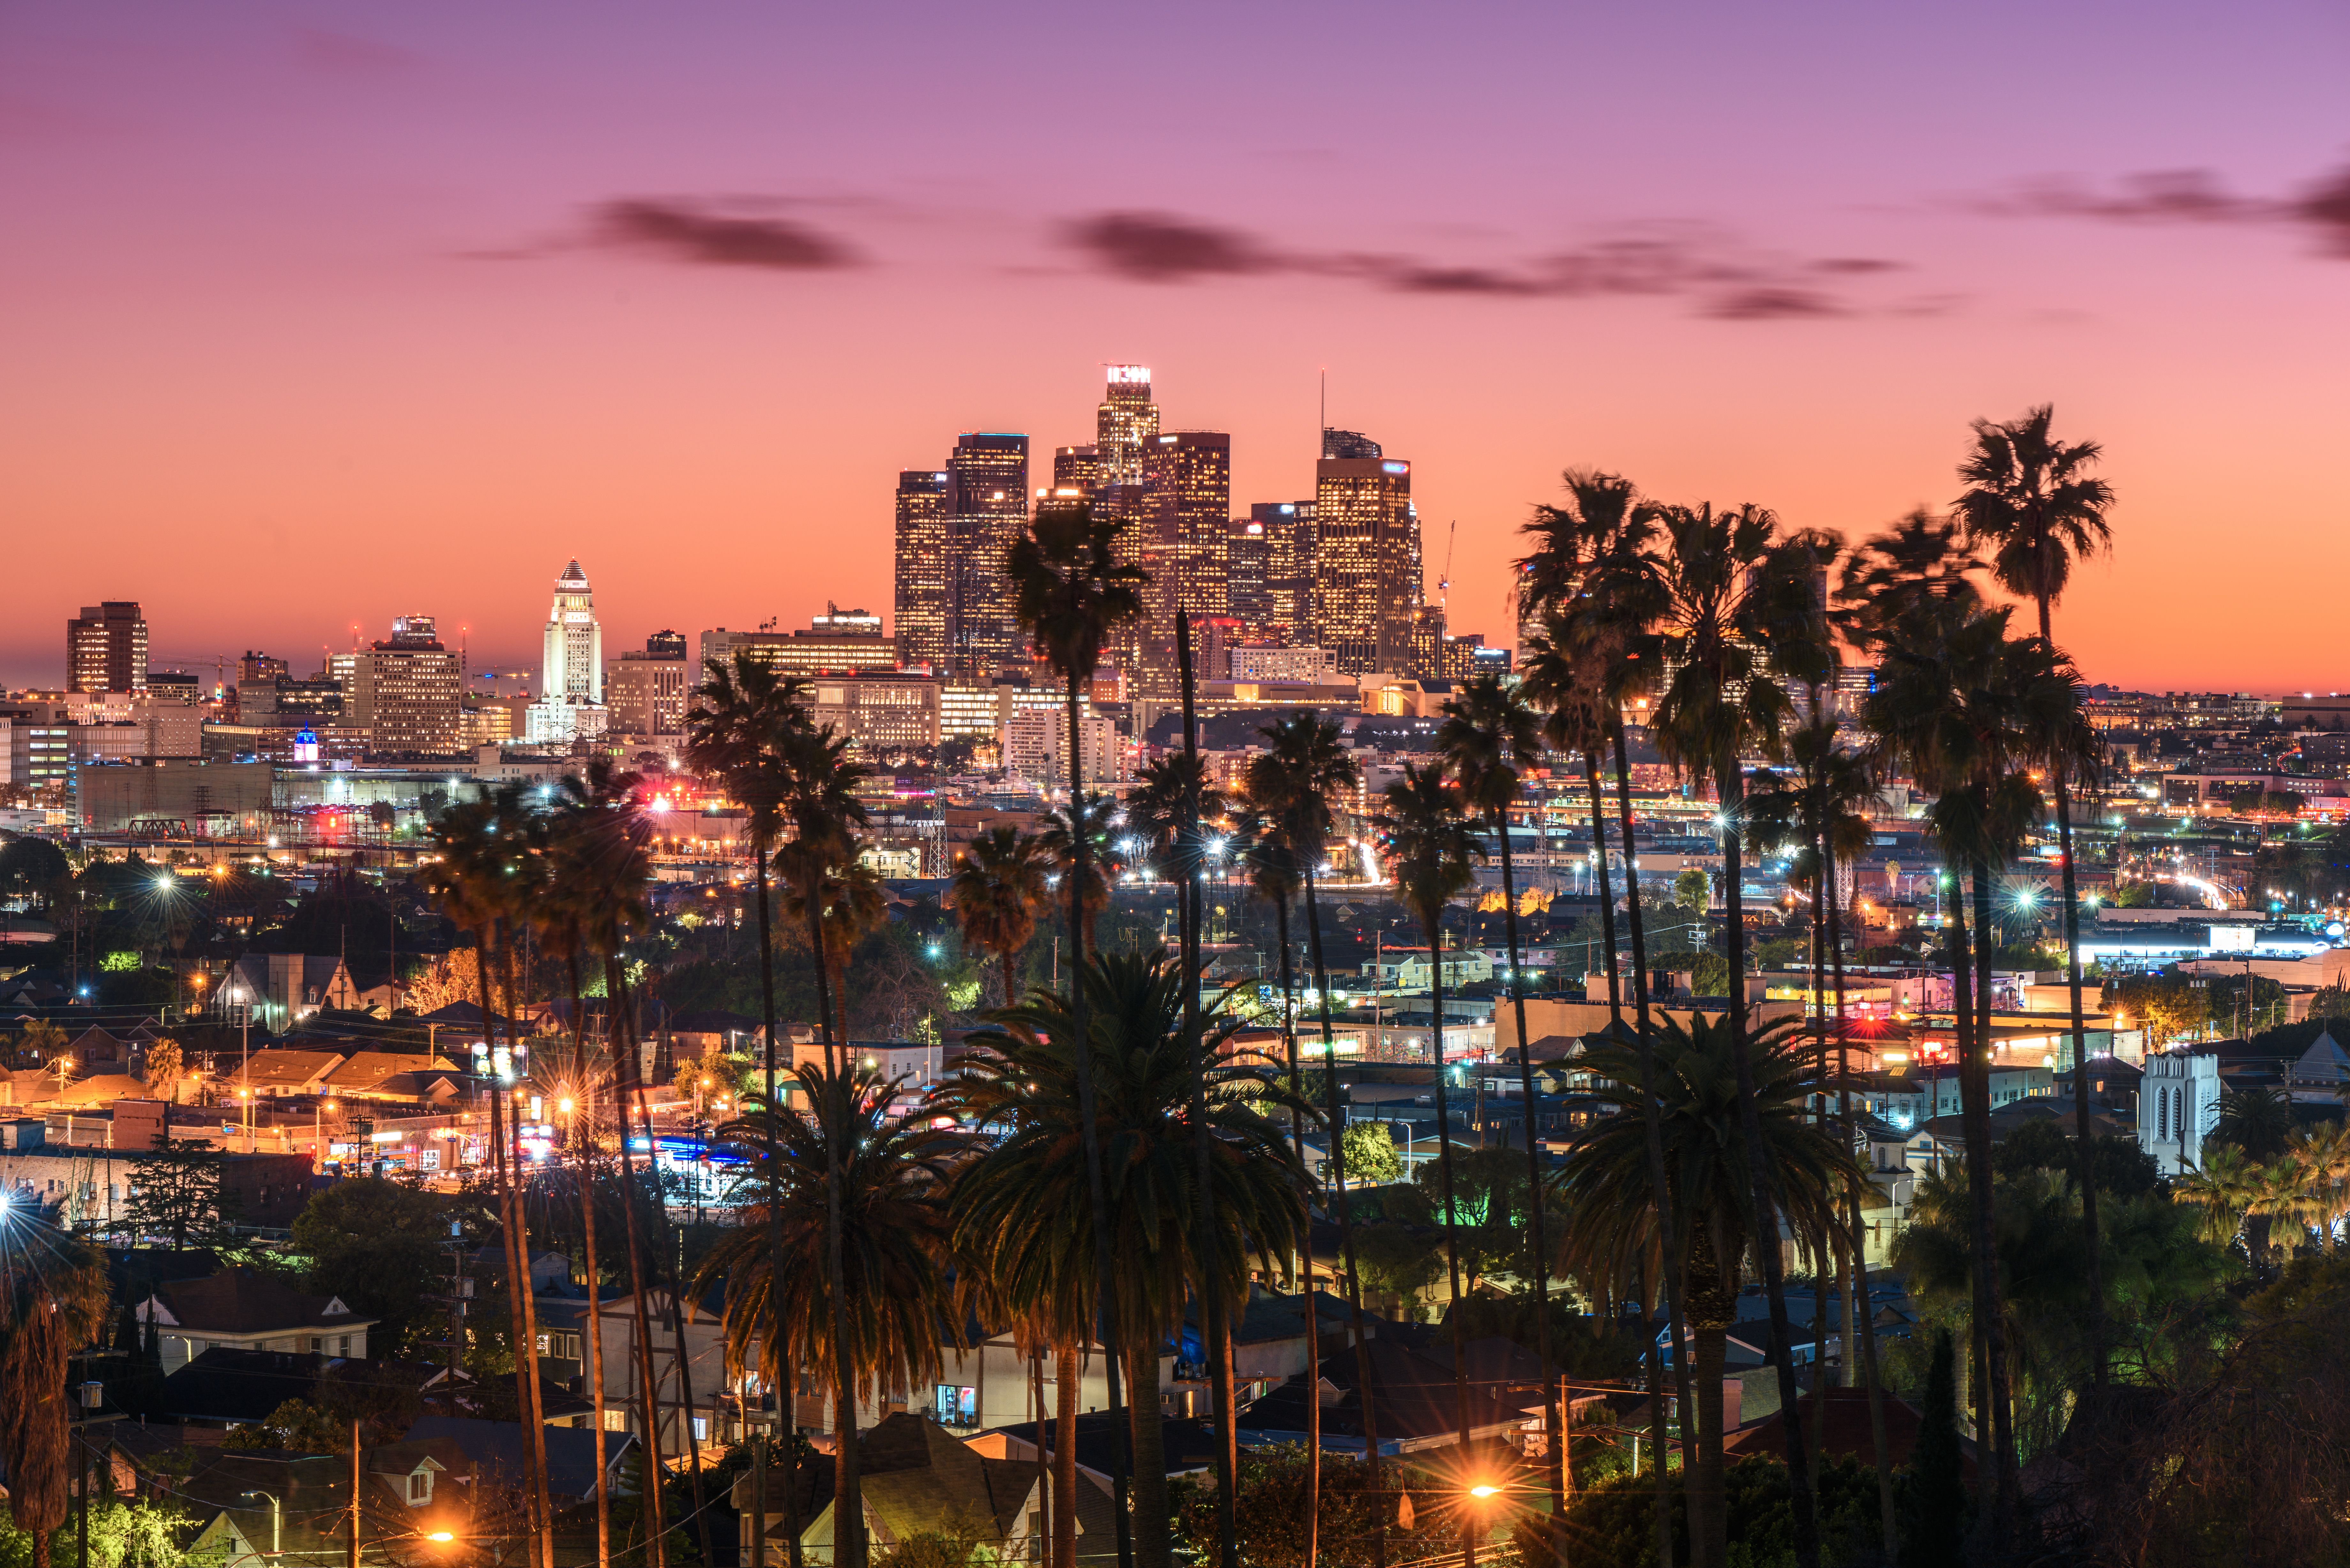 The Los Angeles cityscape and palm trees illuminated on a clear evening just after sunset